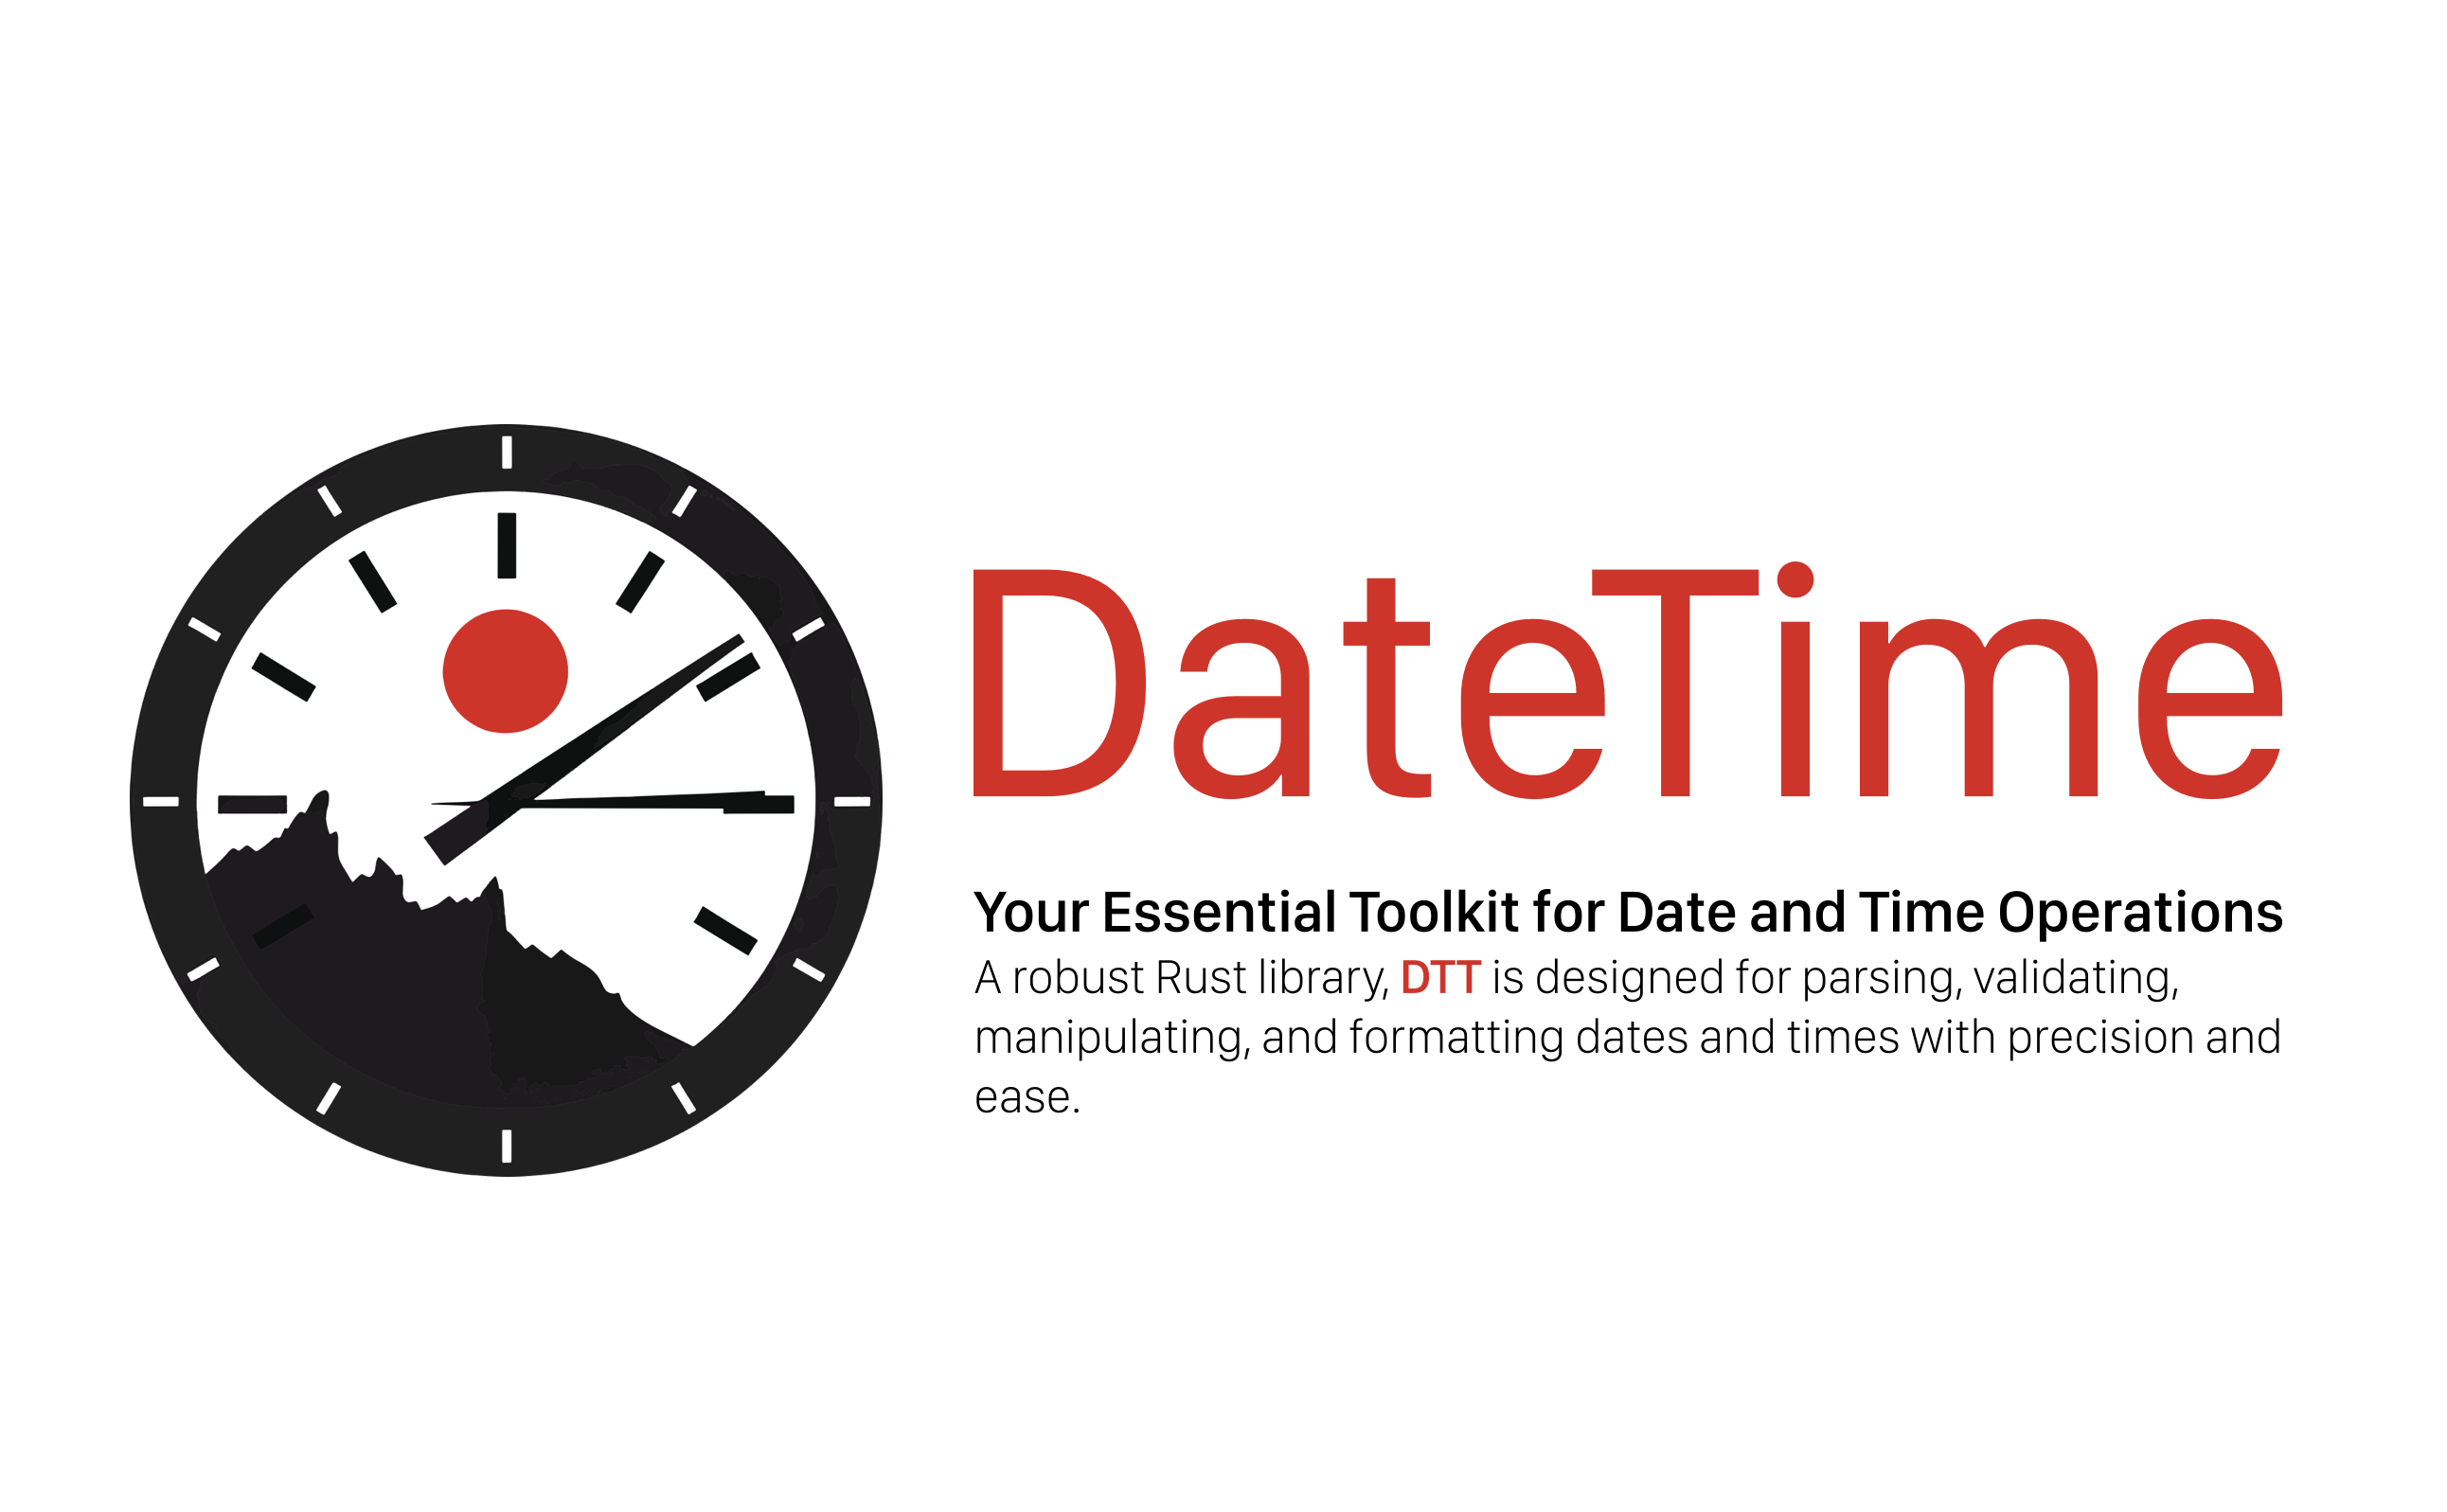 DateTime (DTT), Your Essential Toolkit for Date and Time Operations. A robust Rust library, DTT is designed for parsing, validating, manipulating, and formatting dates and times with precision and ease.